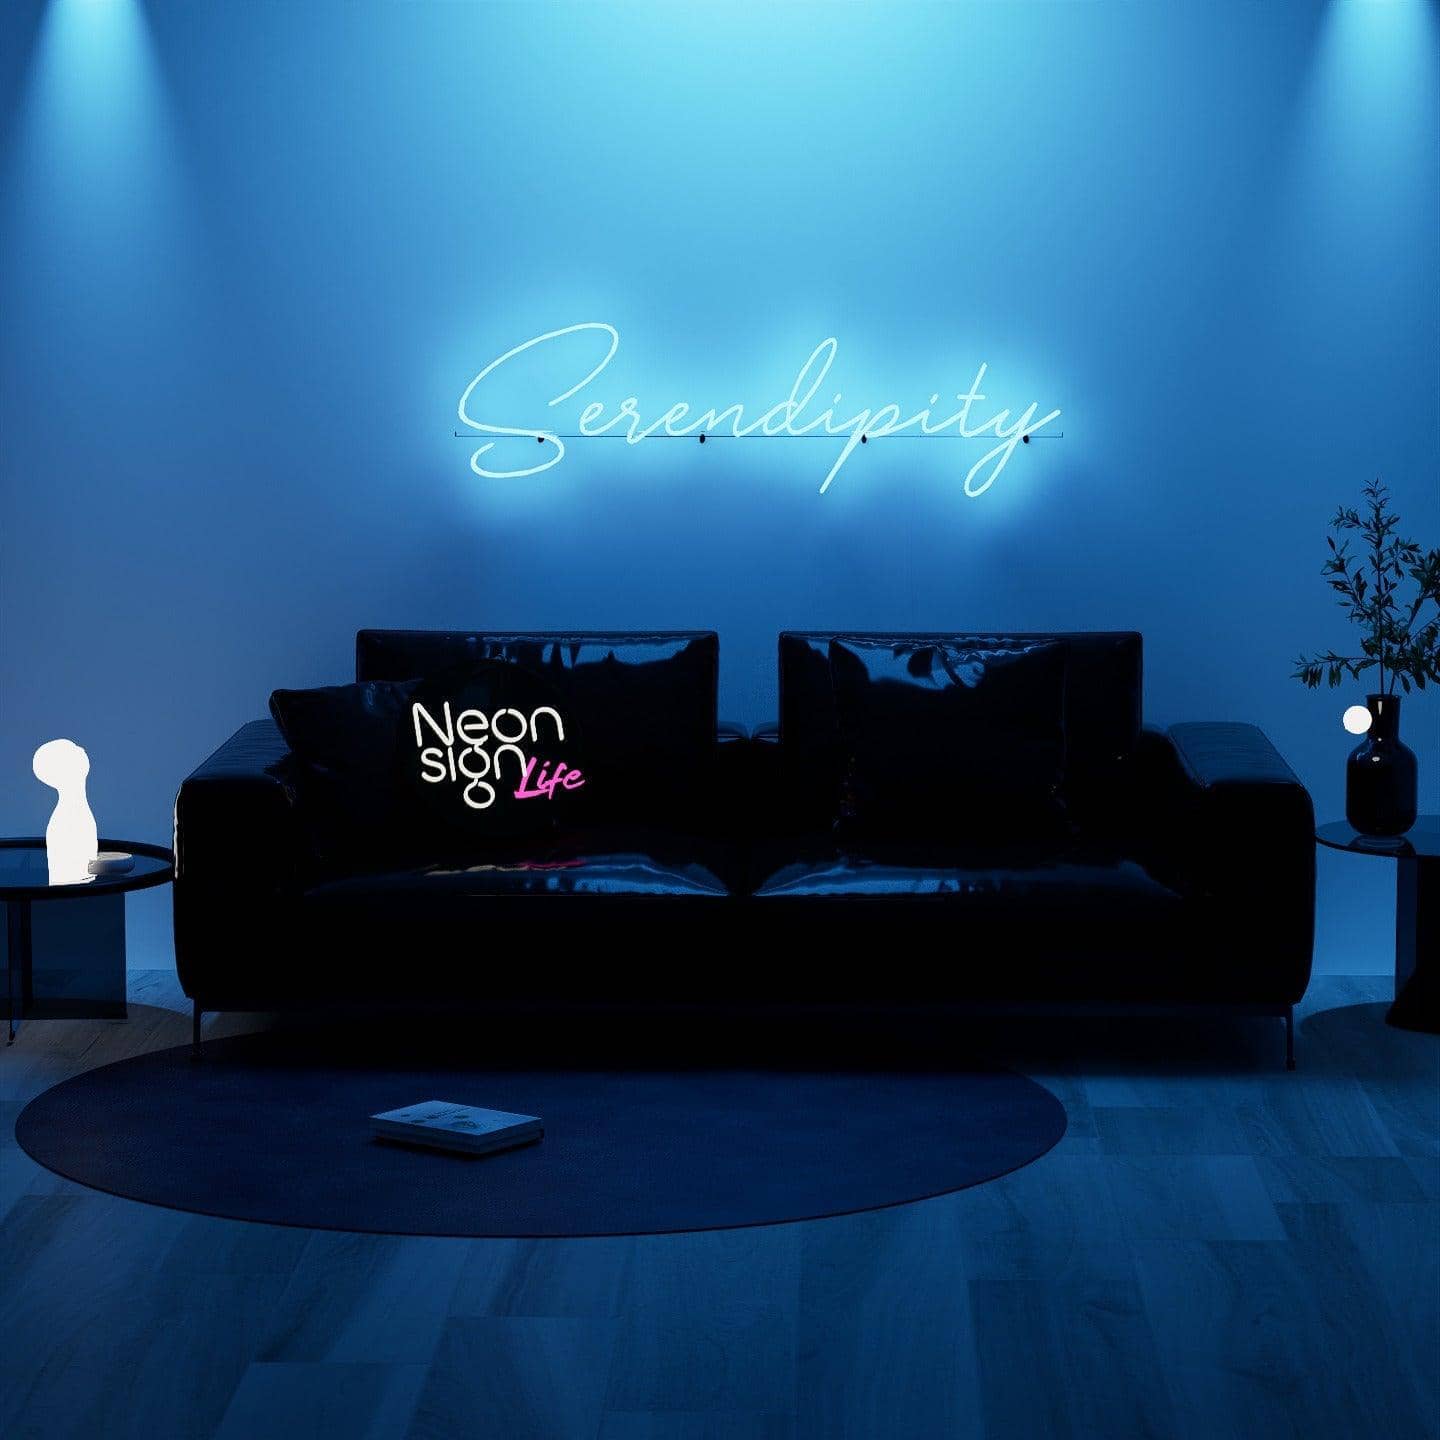 dark-night-lit-blue-neon-lights-hanging-on-the-wall-for-display-srendipity